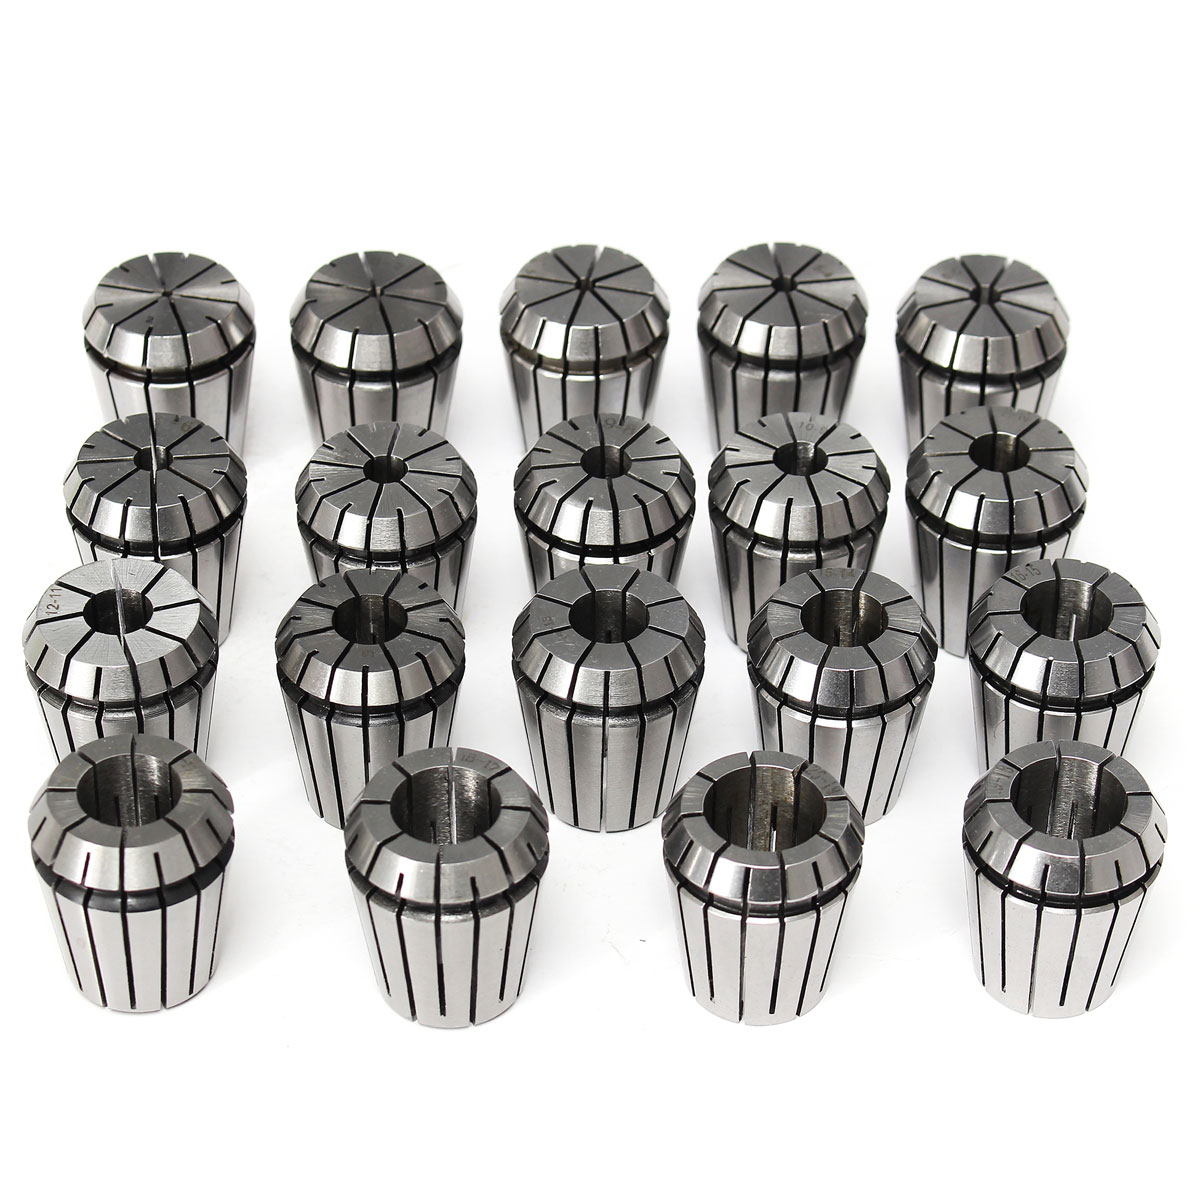 19Pcs-ER32-2mm-20mm-Precision-Spring-Chuck-Set-for-CNC-Workholding-Engraving-and-Milling-Lathe-Tool-1853943-1